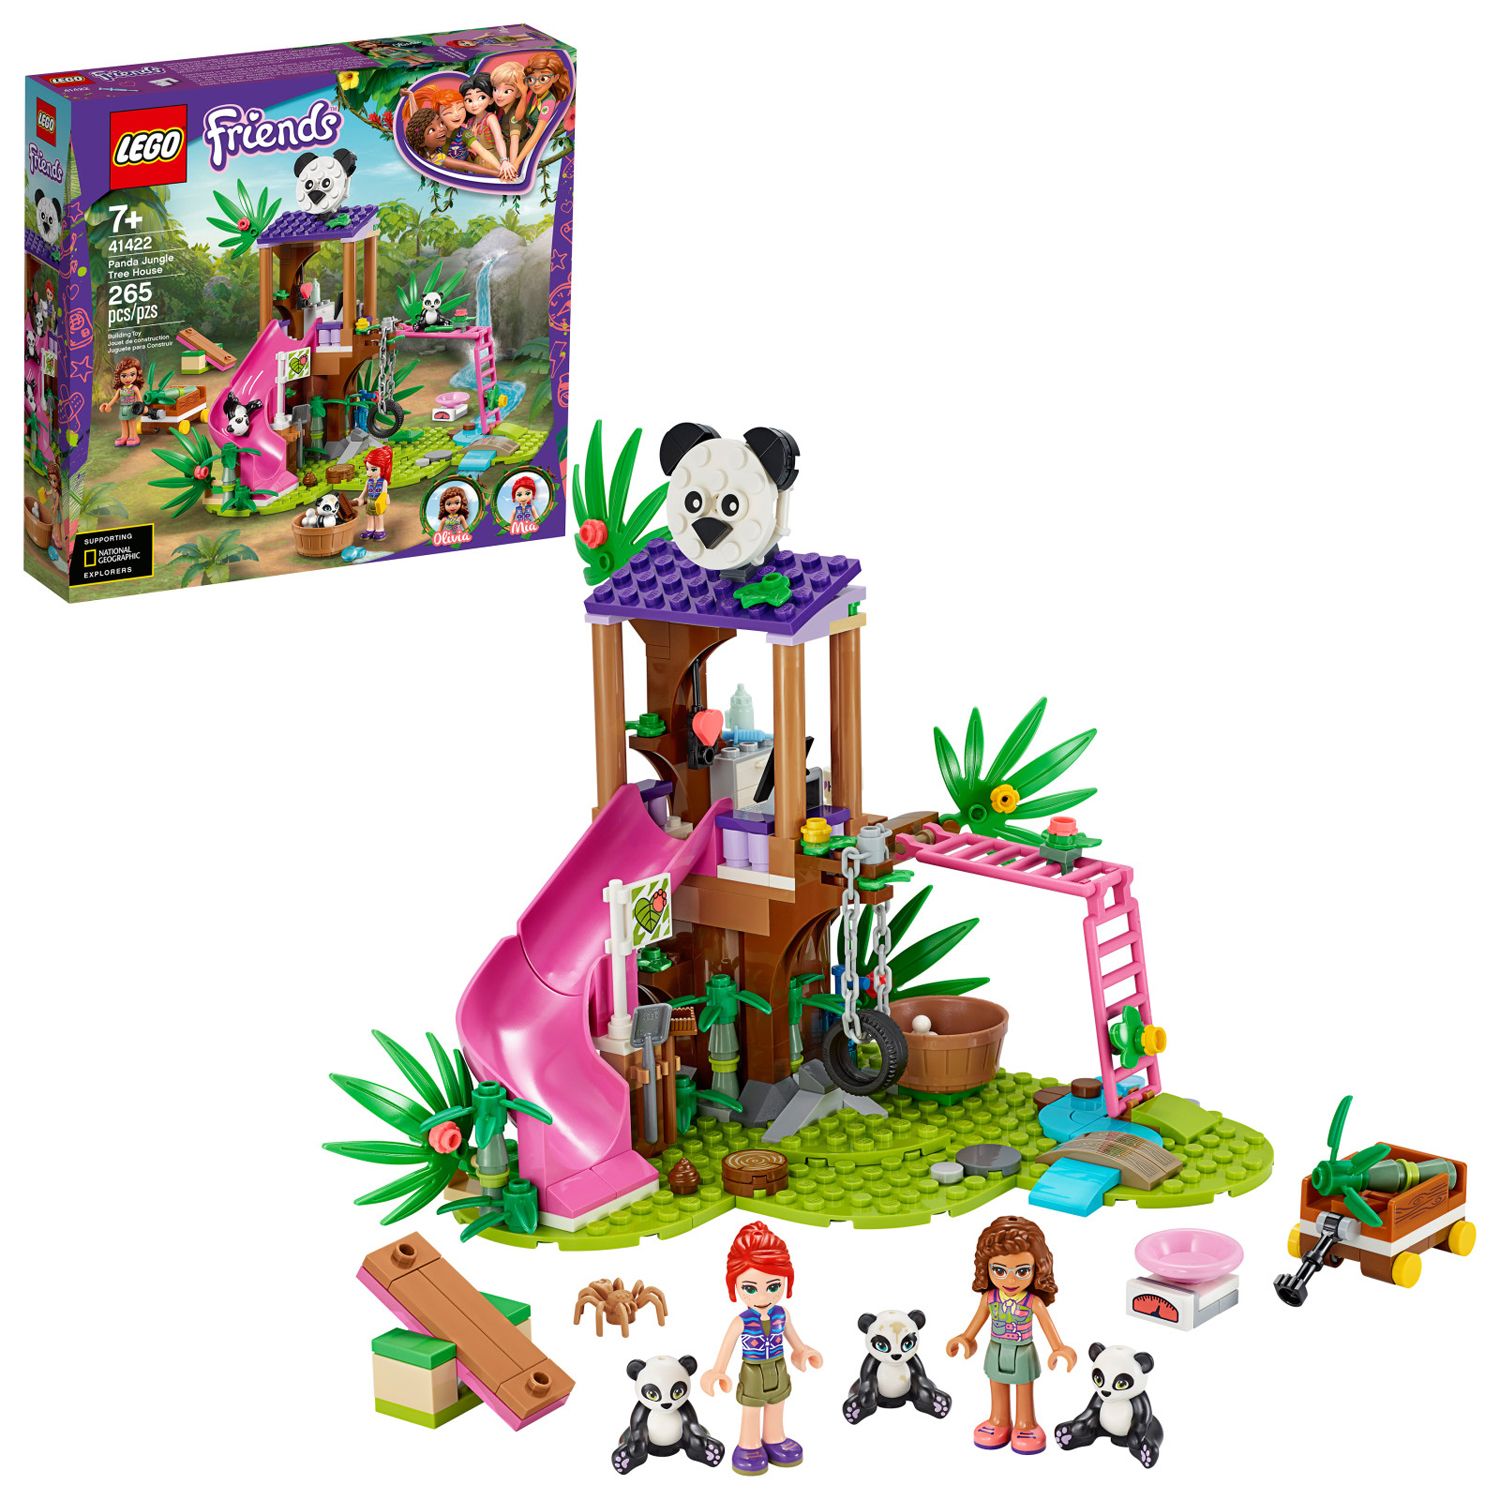 Image for LEGO Friends Panda Jungle Tree House 41422 Set (265 Pieces) at Kohl's.